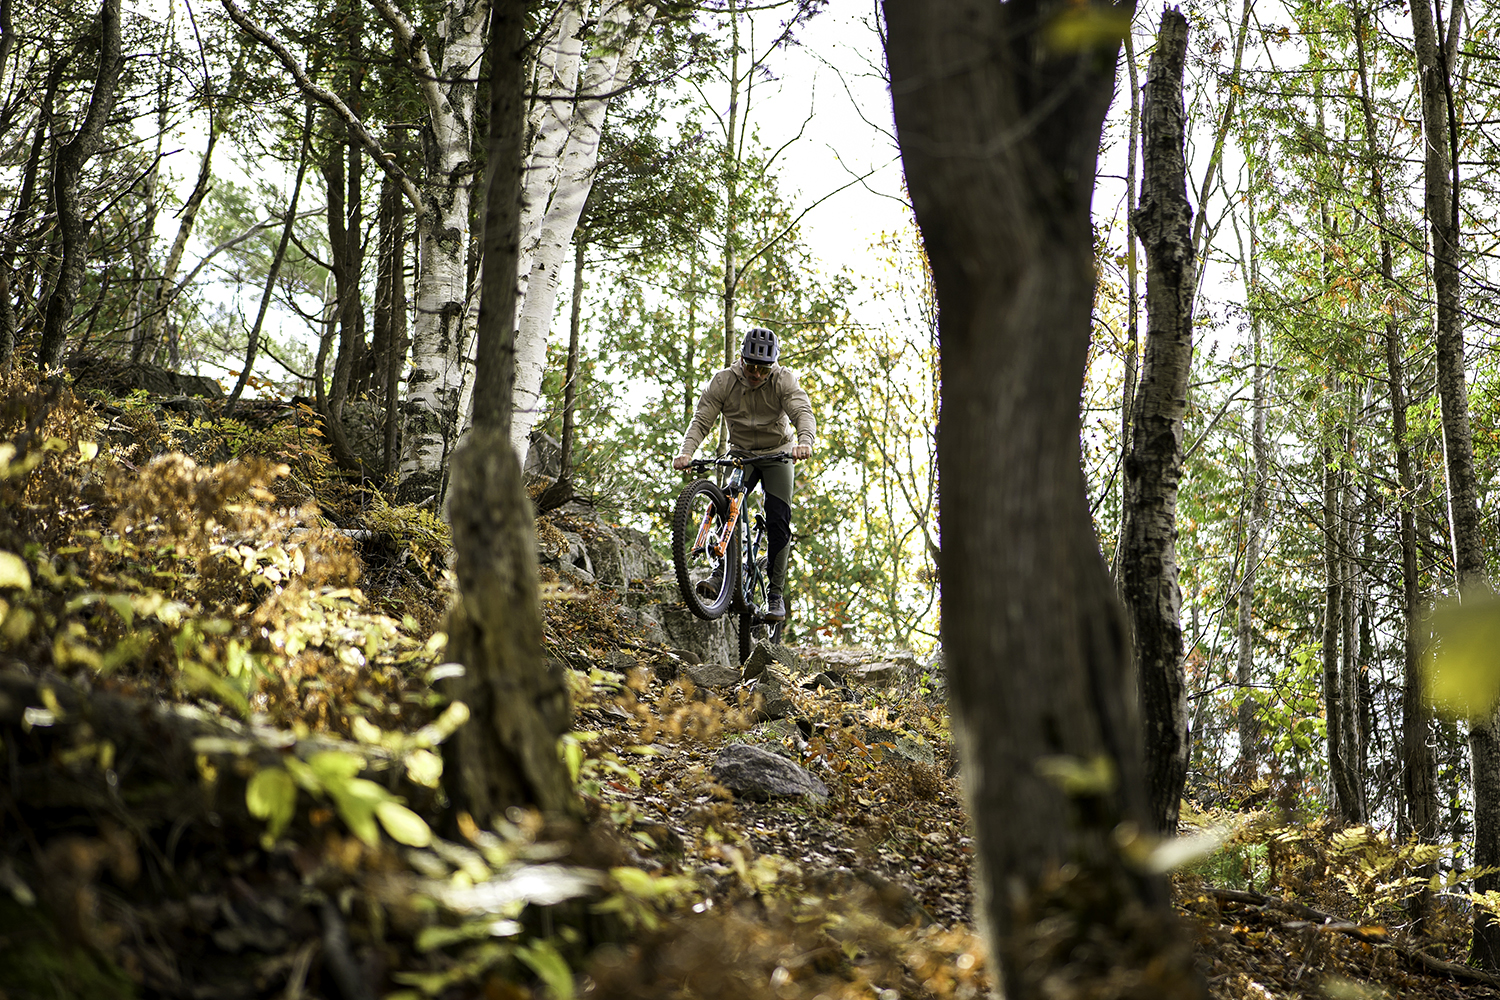 "Brice Shirbach lifting his front wheel while riding a trail filled with Autumn leaves."